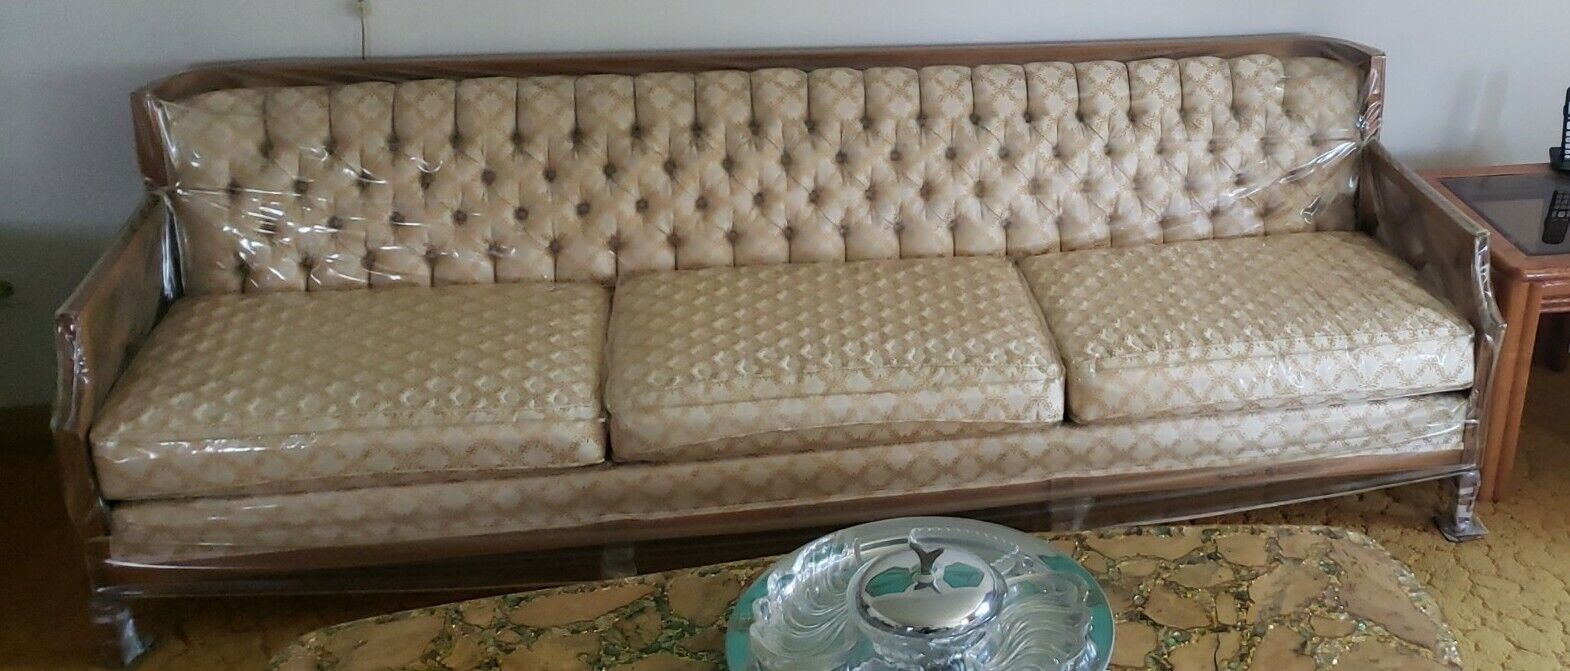 Vintage Couch 1960s in plastic 